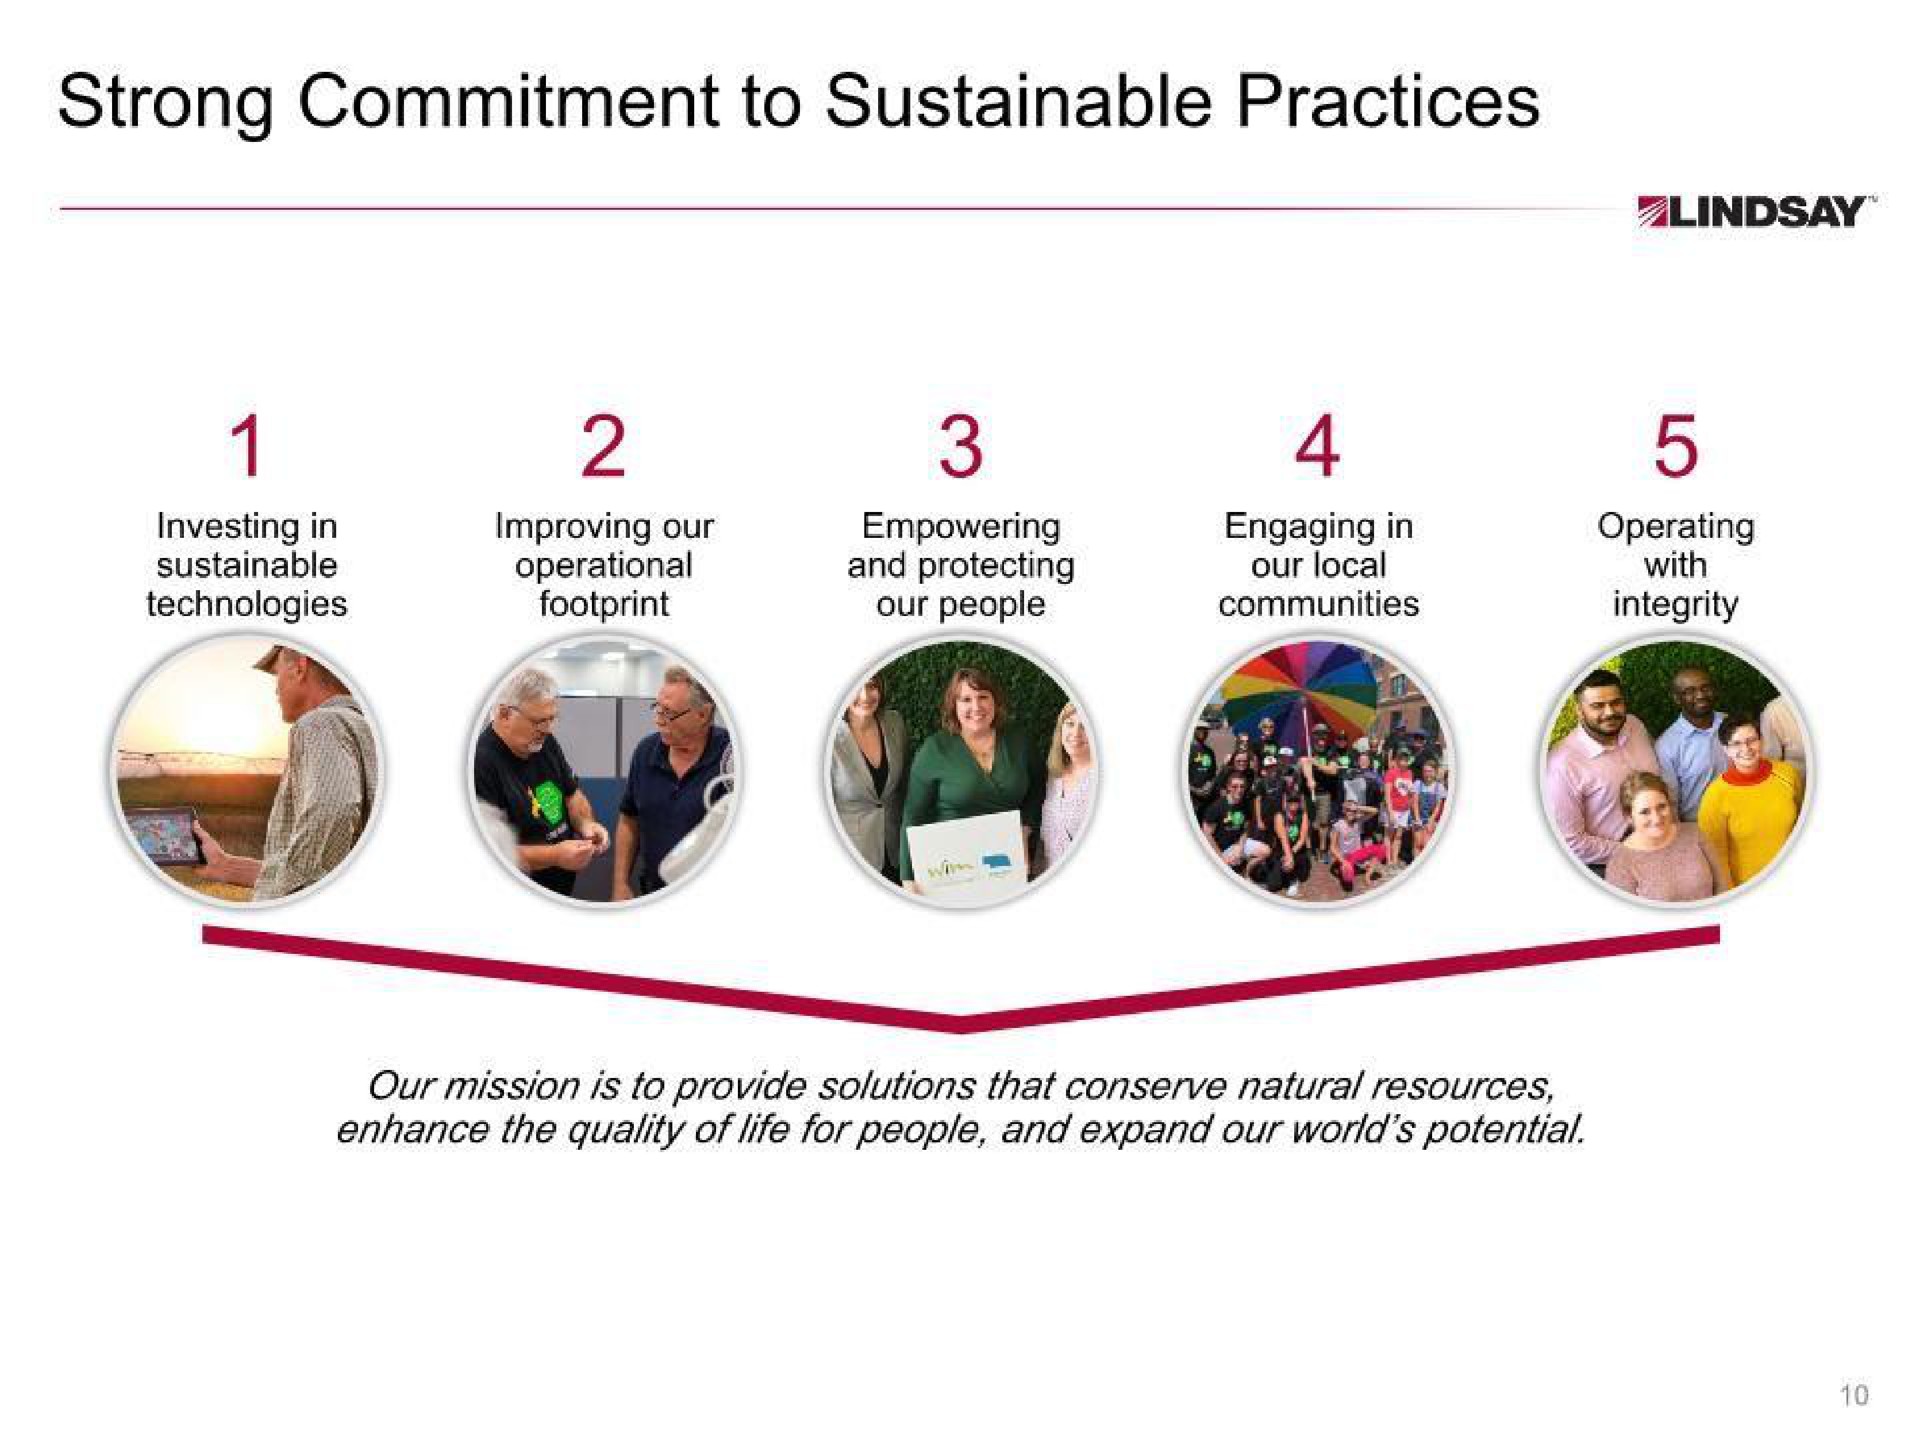 strong commitment to sustainable practices | Lindsay Corporation